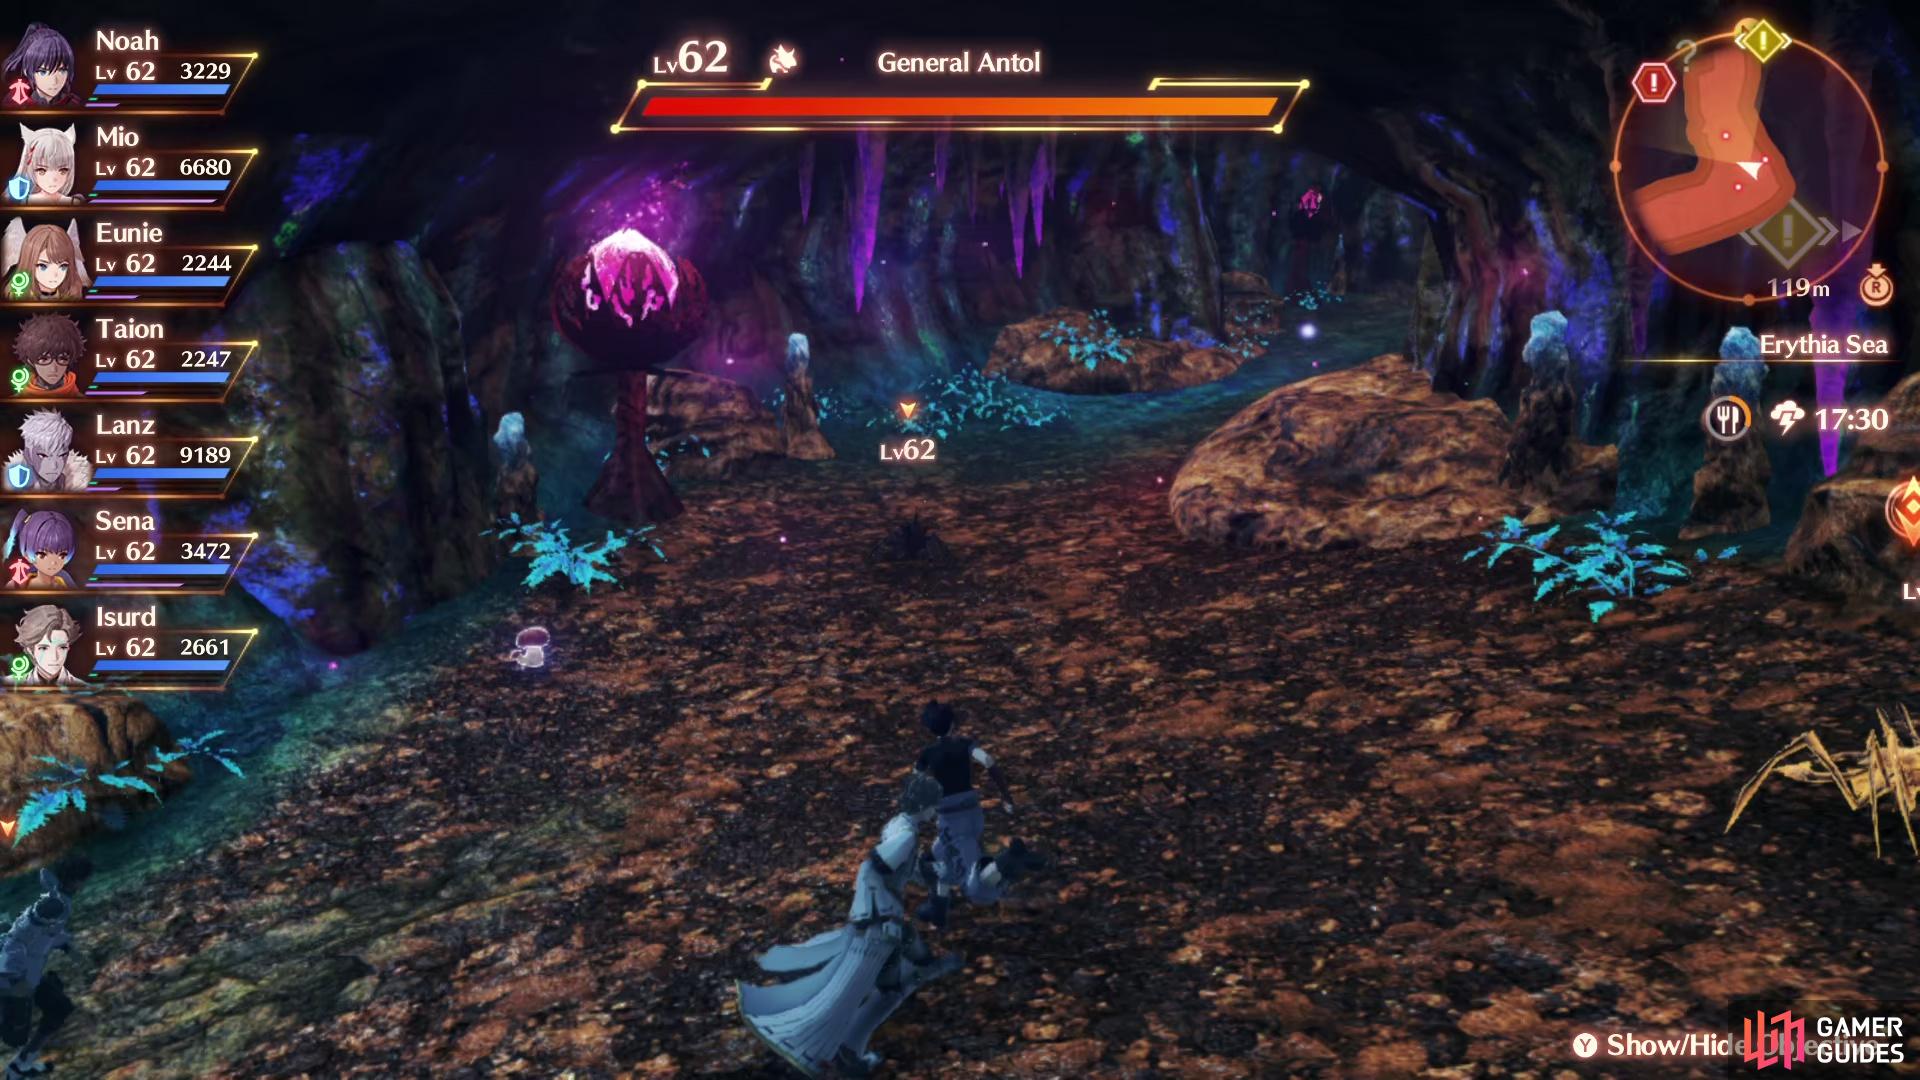 follow the main path west to avoid running into Lv 90+ enemies